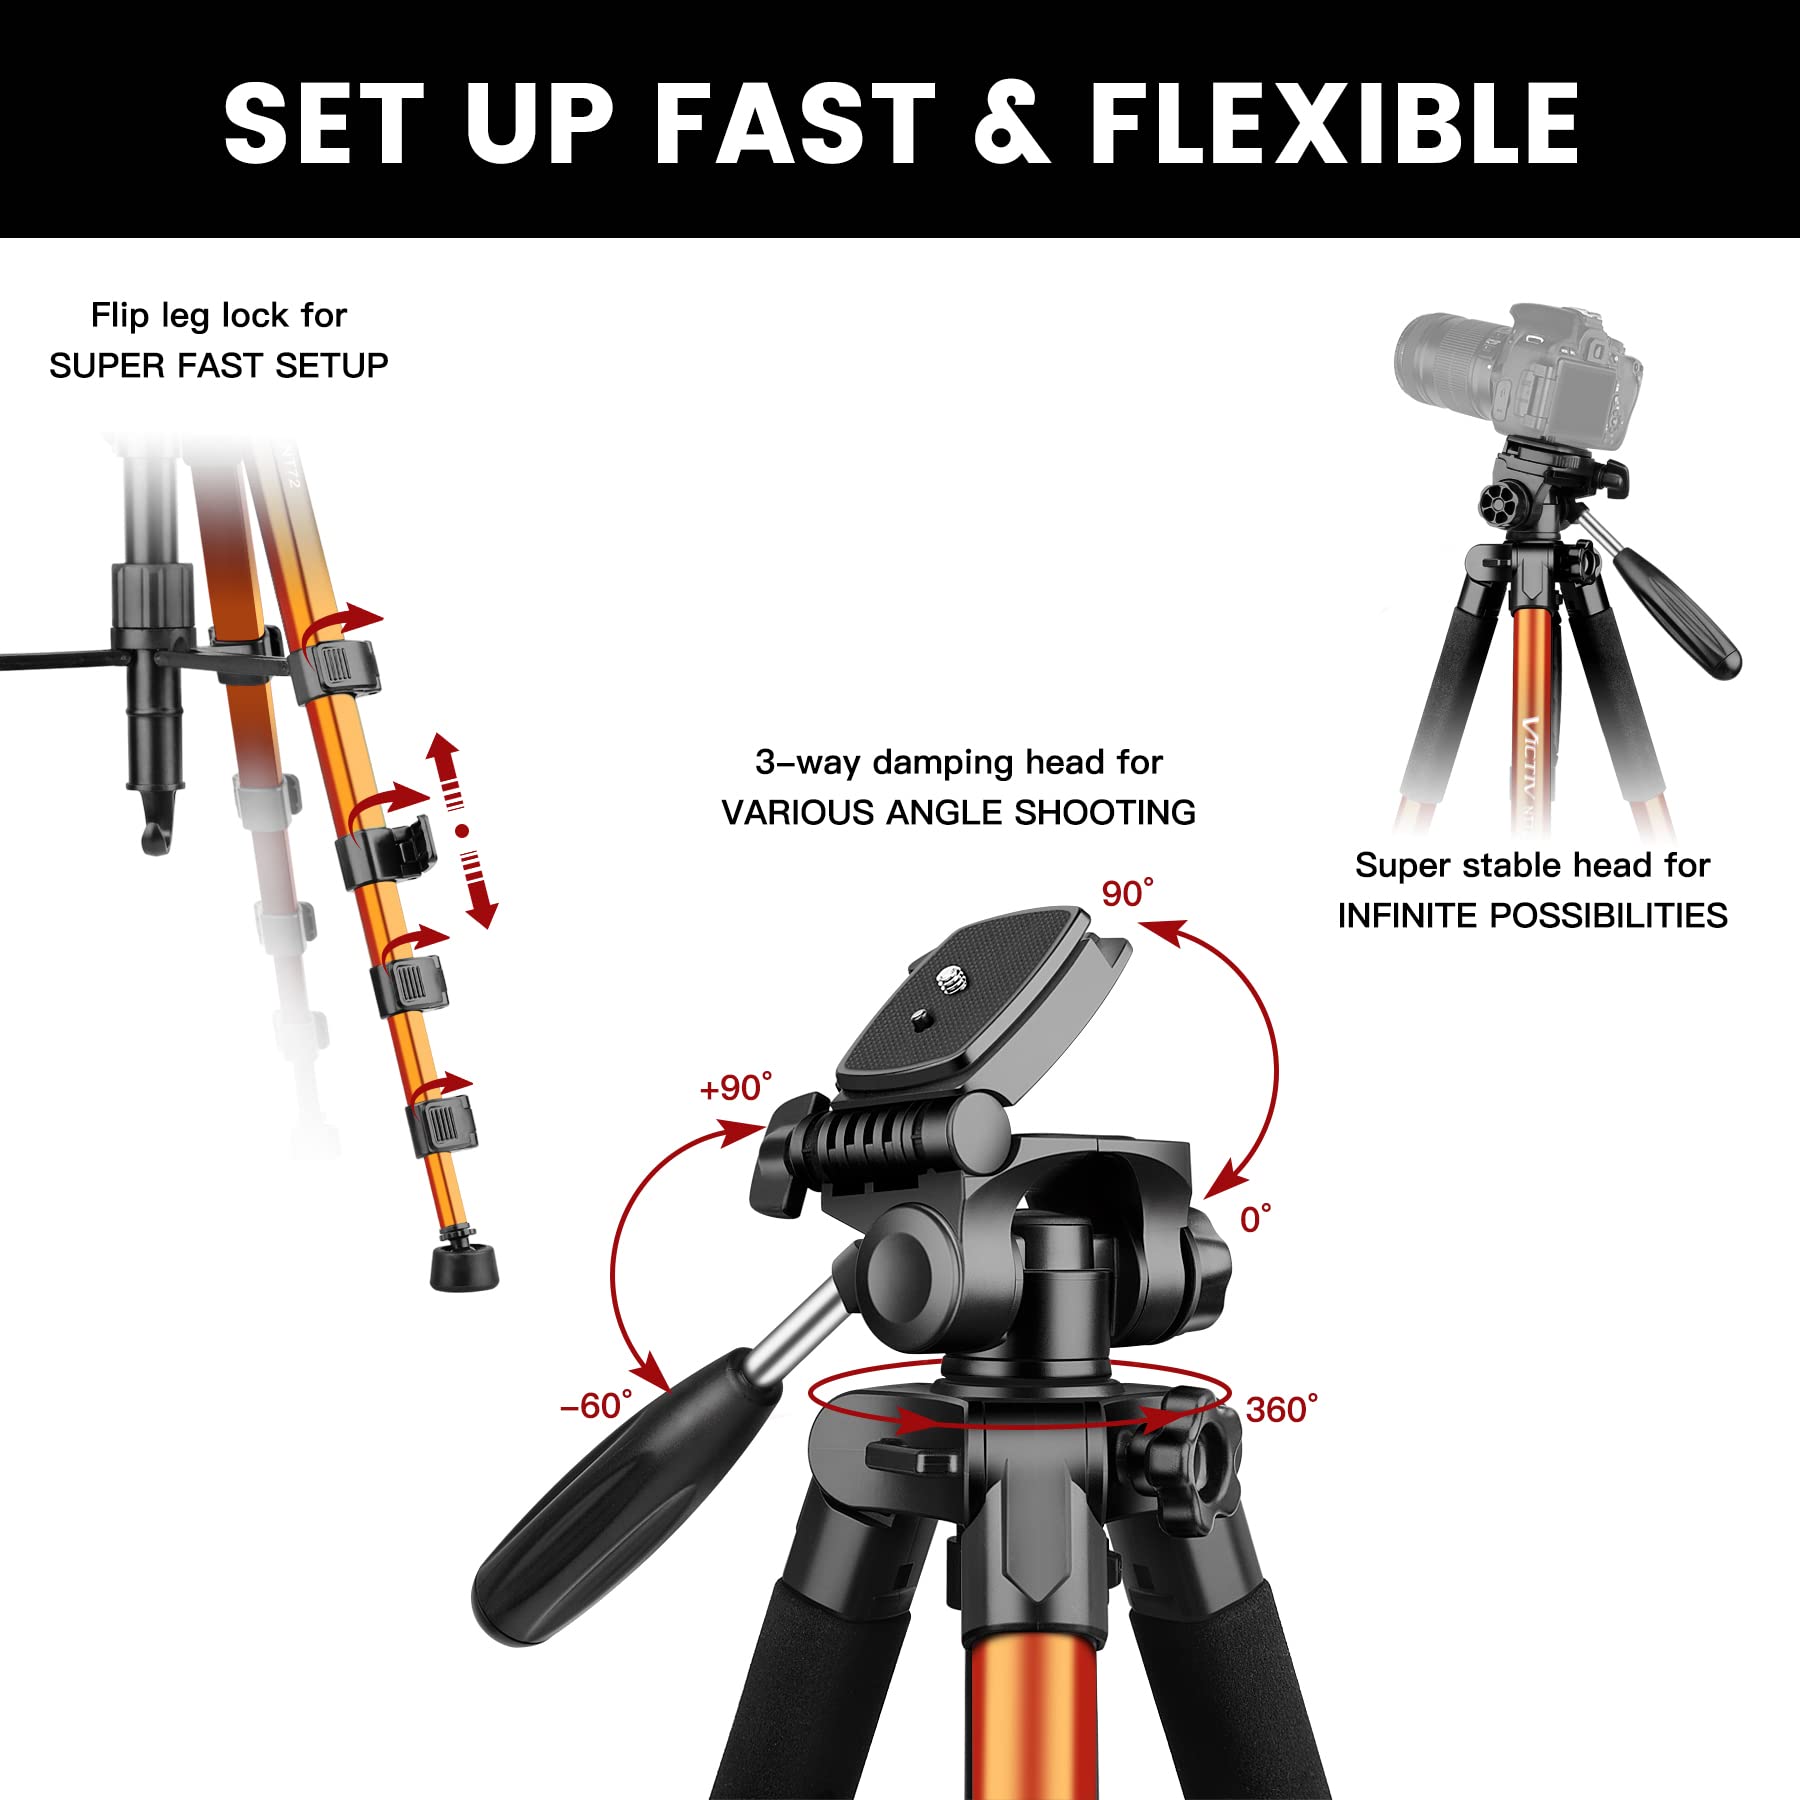 Camera Tripod, 72" Camera Tripod Stand with Remote, Heavy Duty Tripod for Video, Aluminum Tripod Stand with Bag, Complete Tripod Unit for Canon Nikon Sony, Perfect for Phone & Camera Photography